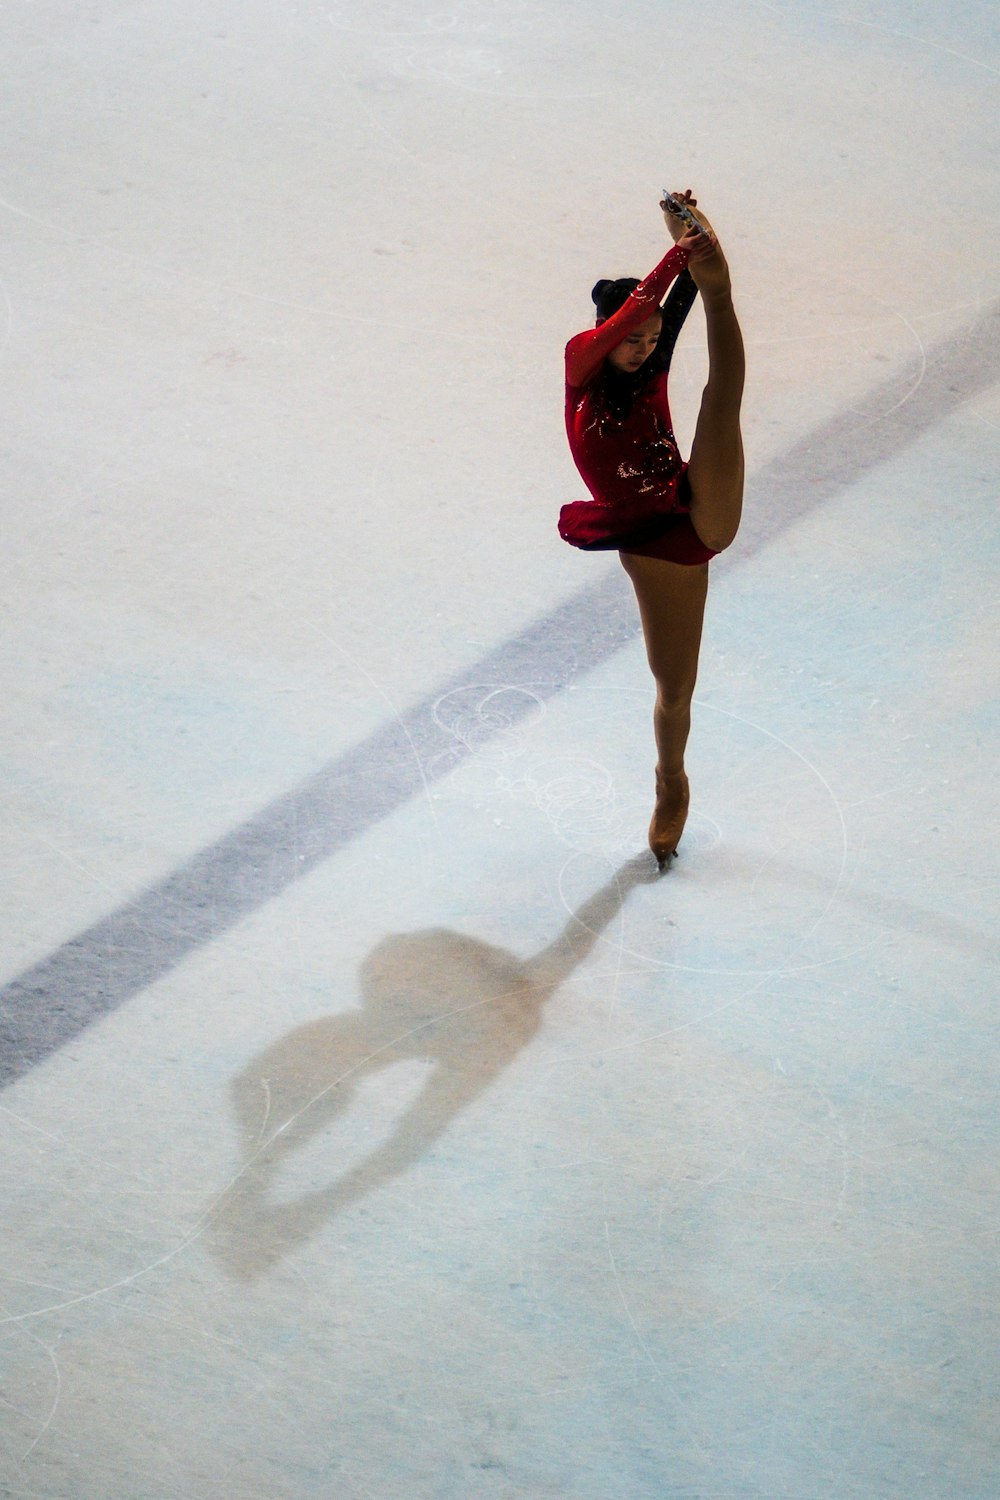 woman performing on ice skating rink